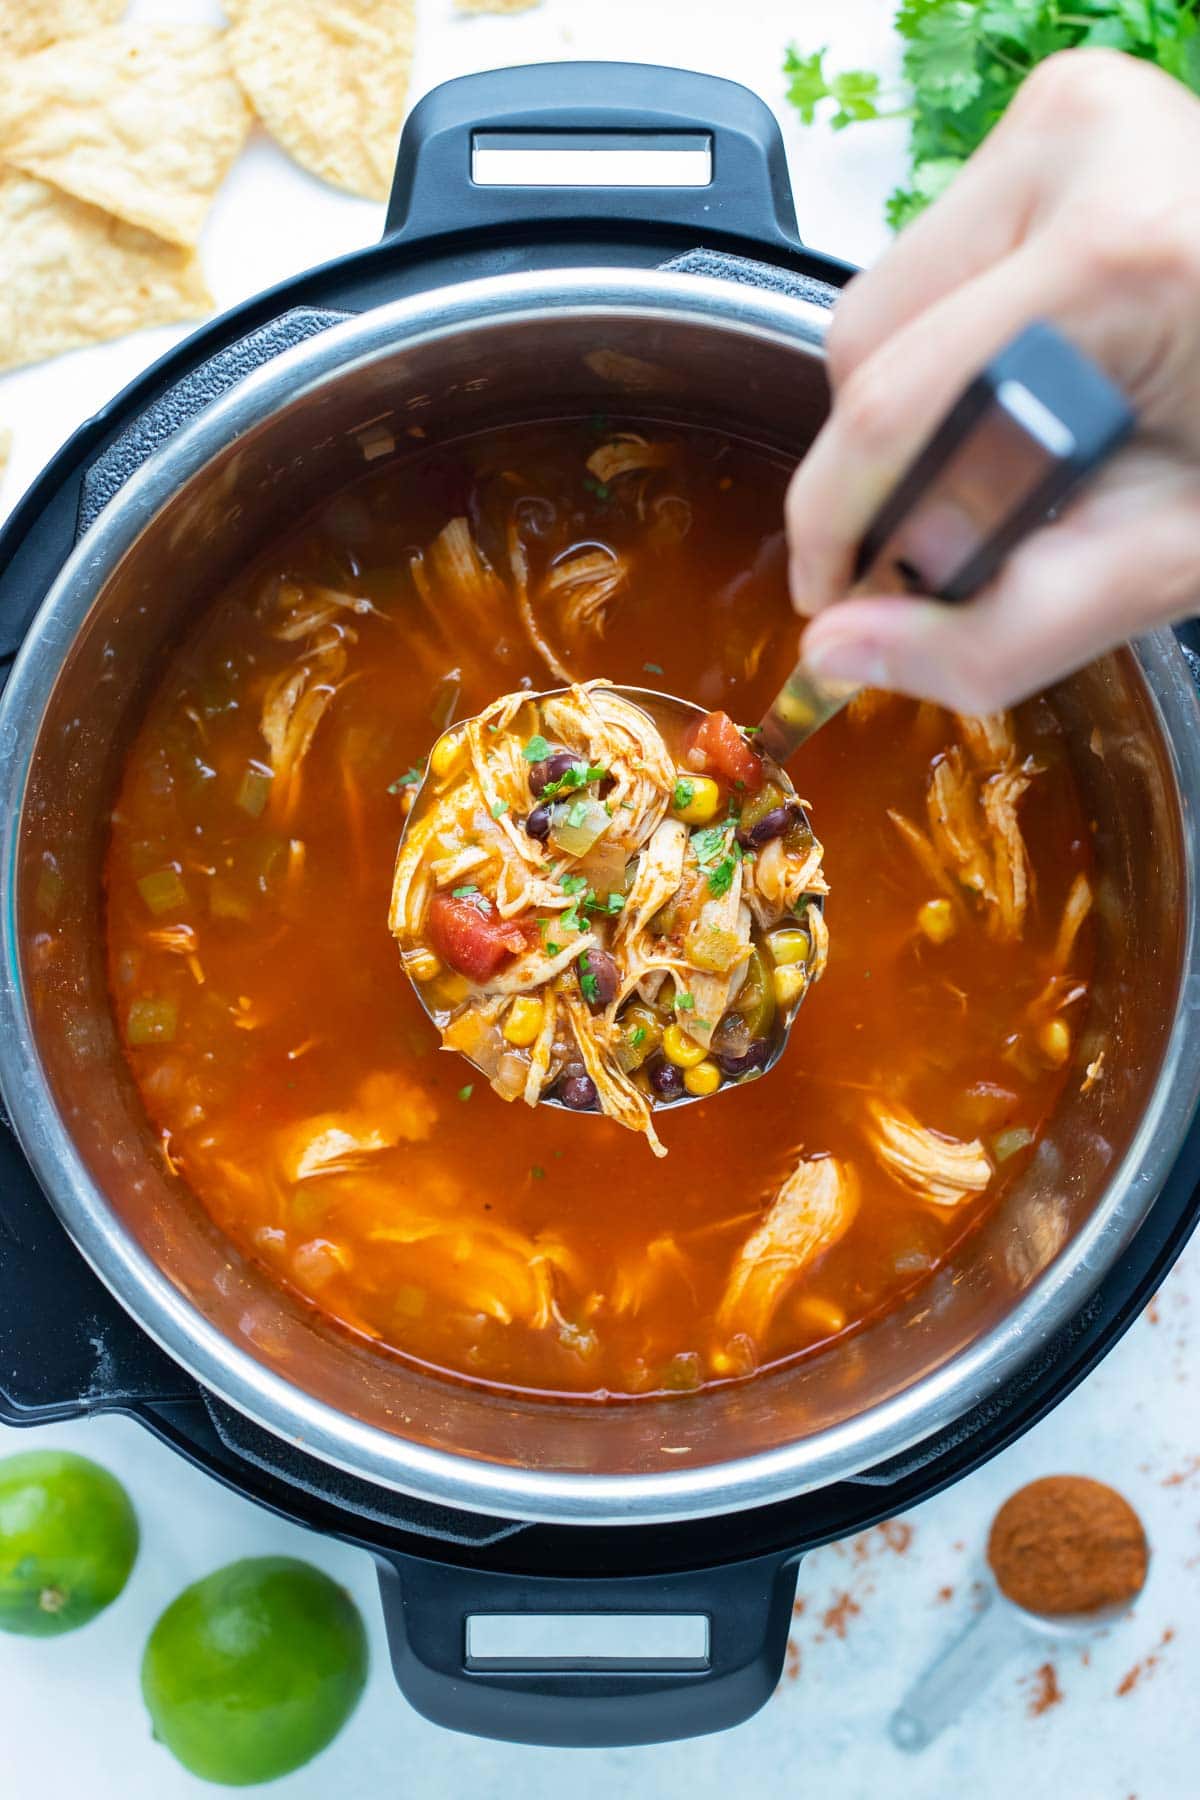 Healthy Mexican chicken tortilla soup is made in a pressure cooker for an easy dinner.